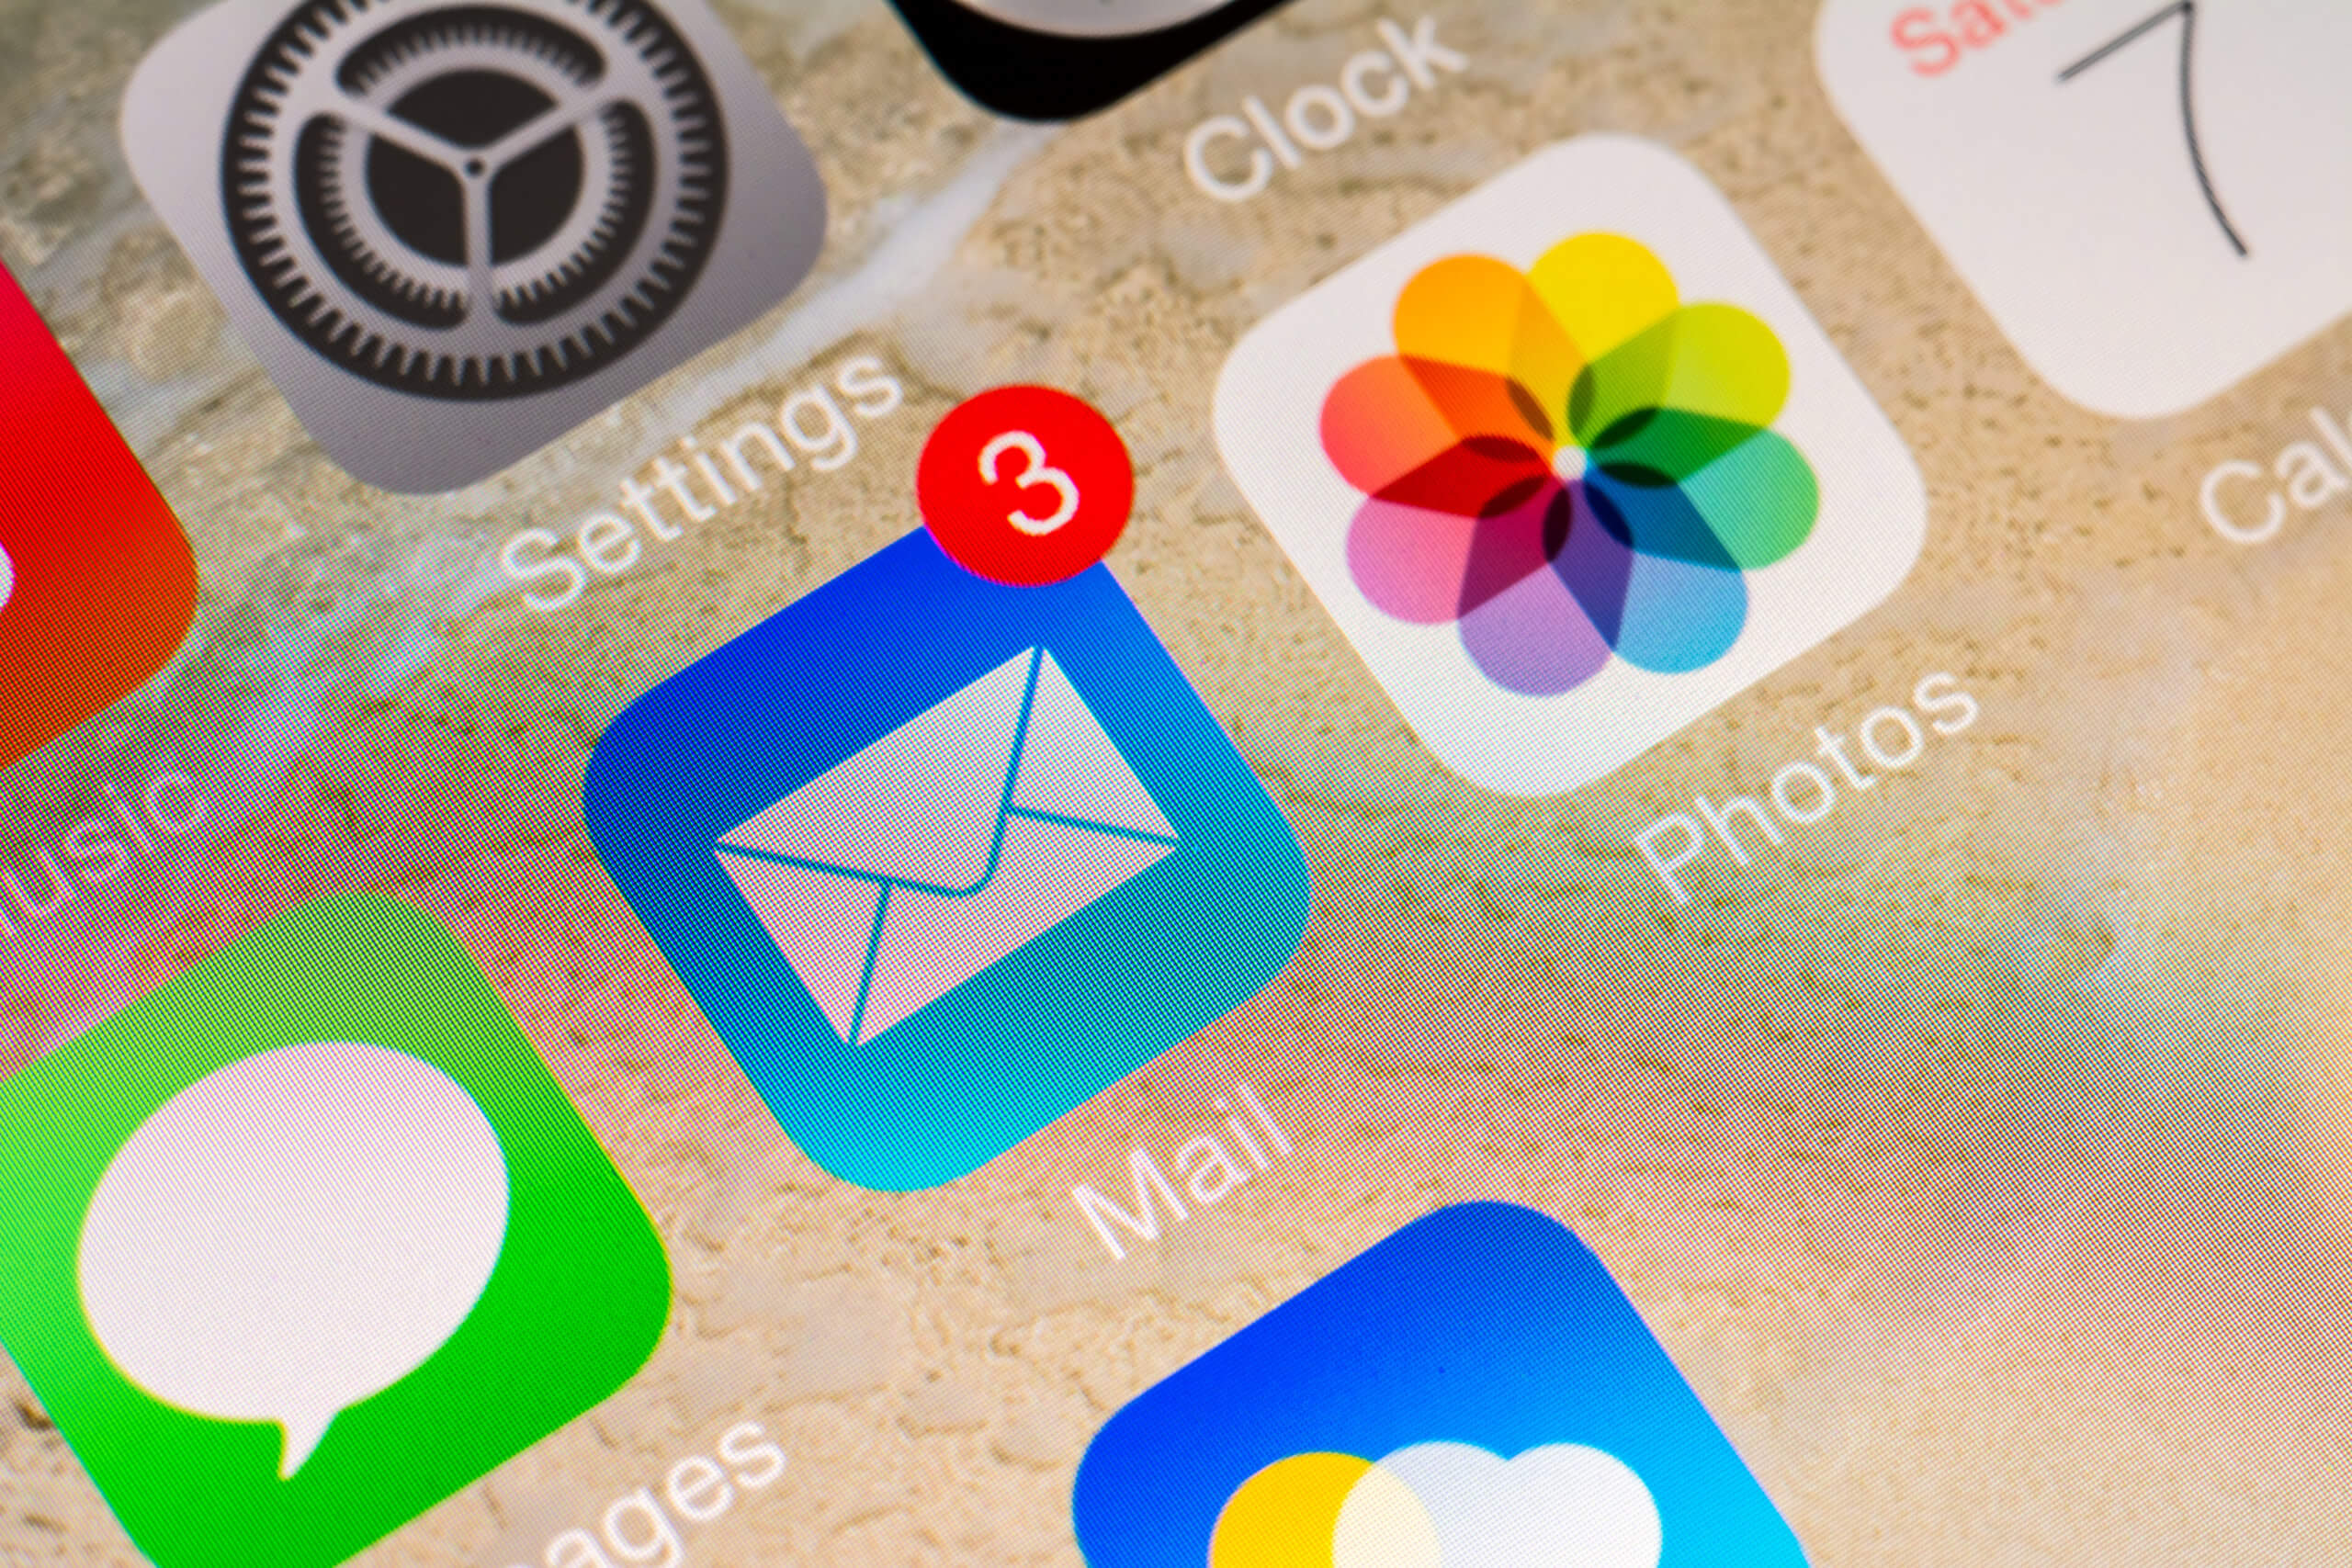 What Apple’s iOS 15 Update Will Mean For Email Marketing (And What To Do About It)